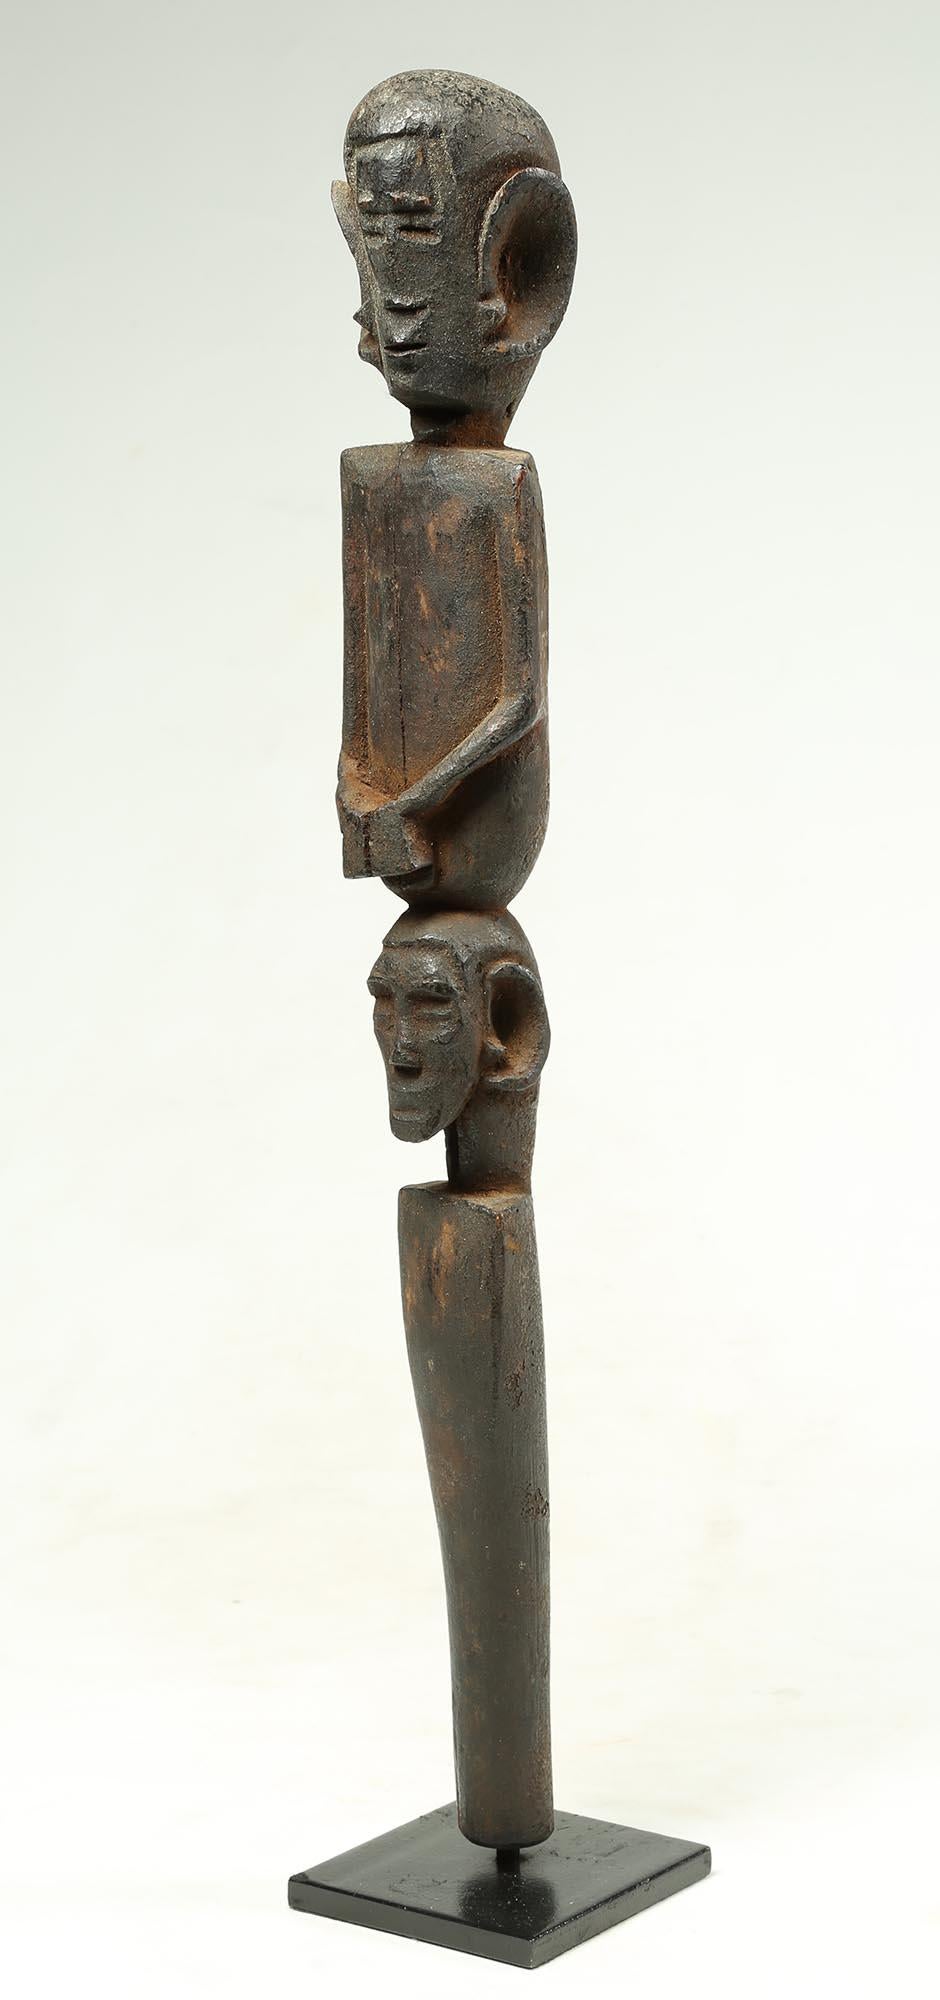 Tribal East African Double Zigua Figure with Large Ears, Early 20th Century, Tanzania